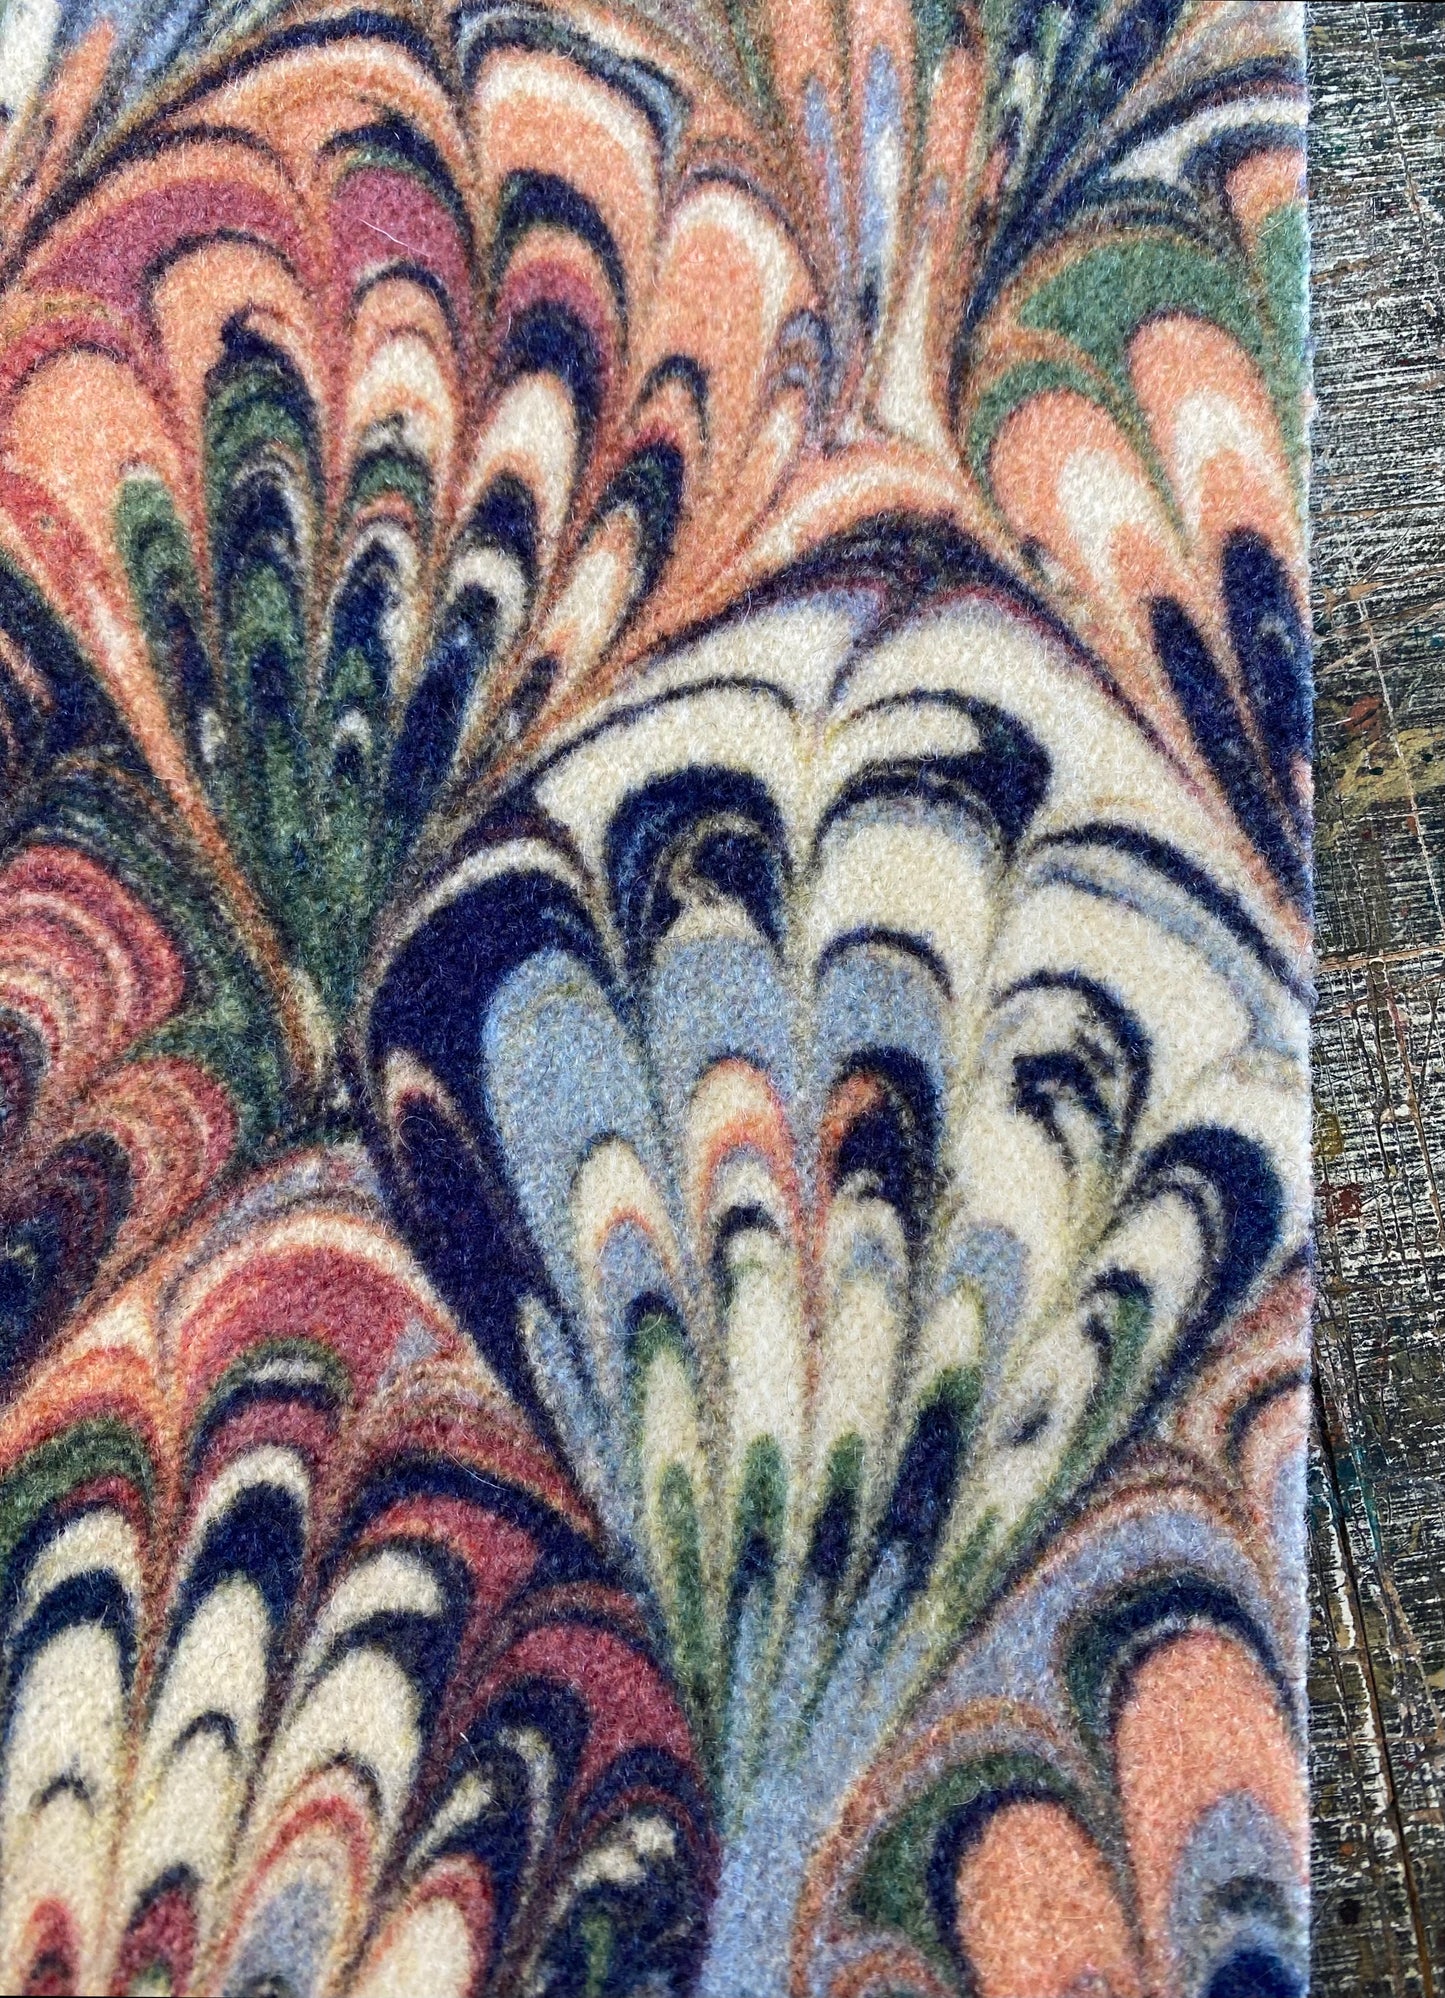 Printed Marbled Wool Fabric - 'Serpentine' Col: Summer - Wool Mix